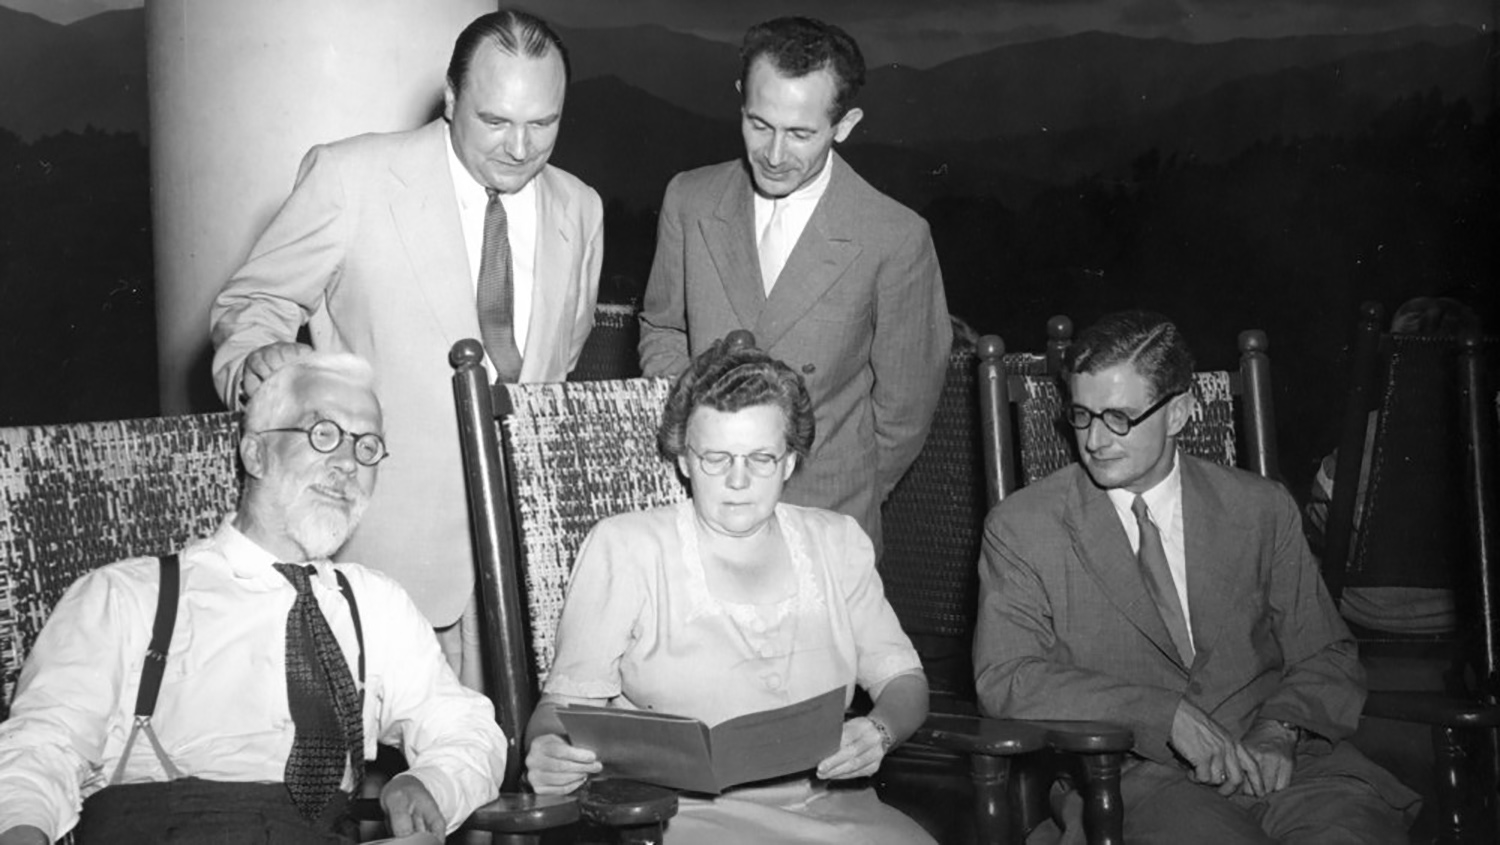 Gertrude Cox, professor of statistics and head of the Department of Experimental Statistics, seated with four others, circa 1950. Photo source: NC State Libraries Special Collections Research Center